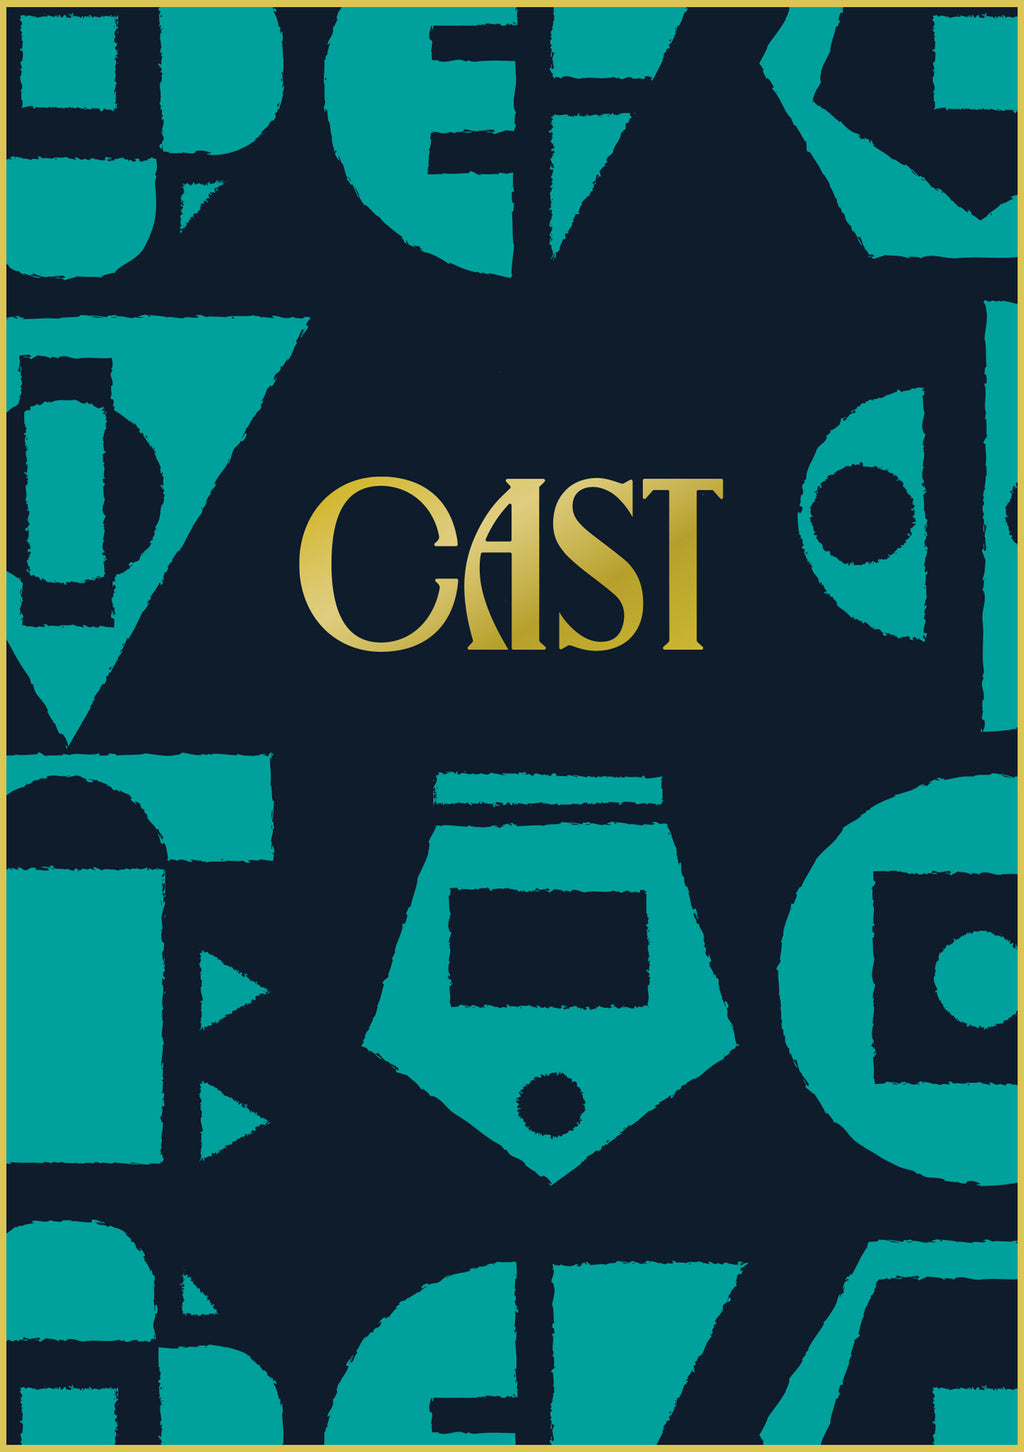 Cast Gift Card